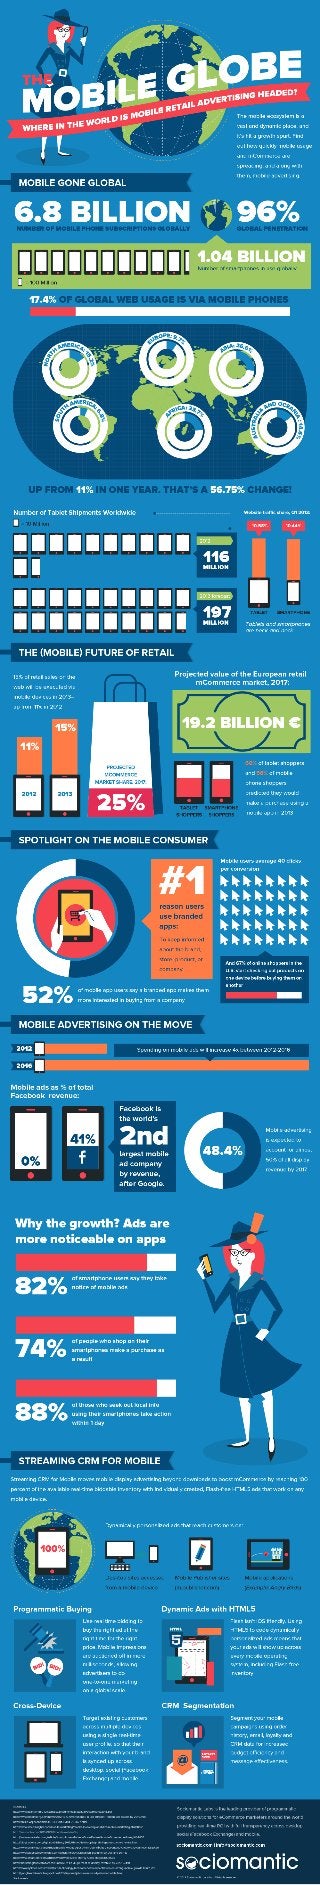 Where in the World is Mobile Advertising Headed? (EU)